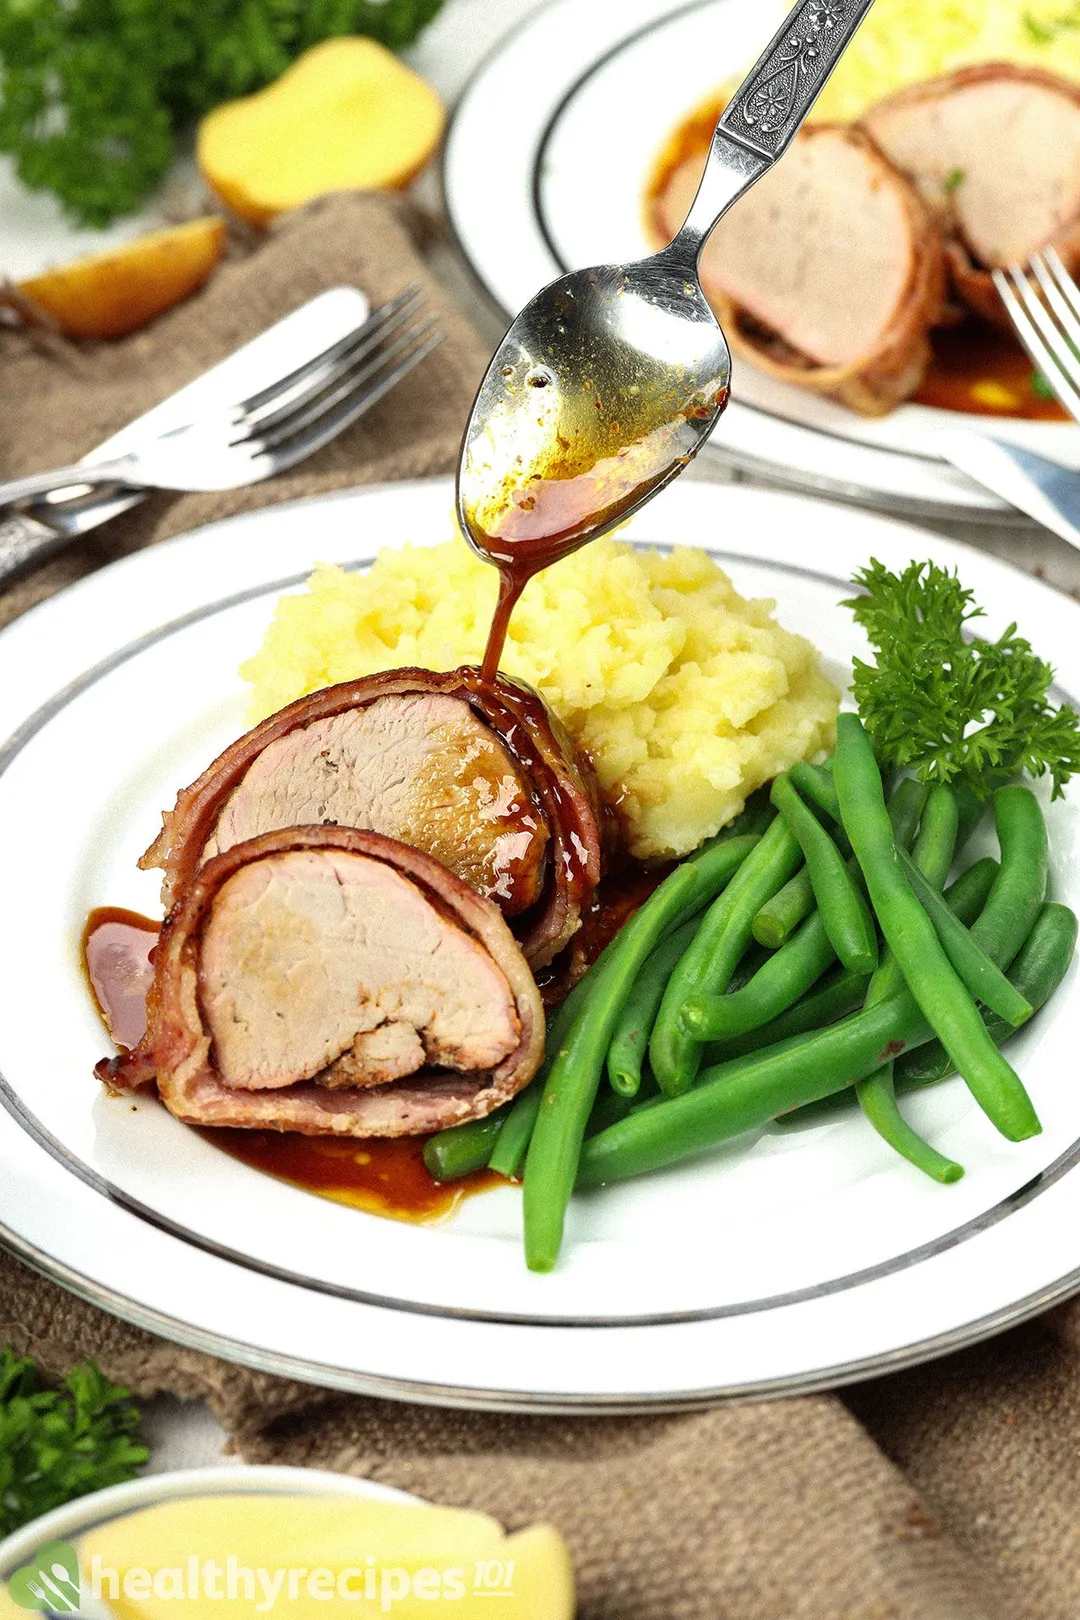 a plate of two slices of cooked pork tenderloin with mashed potato and green beans